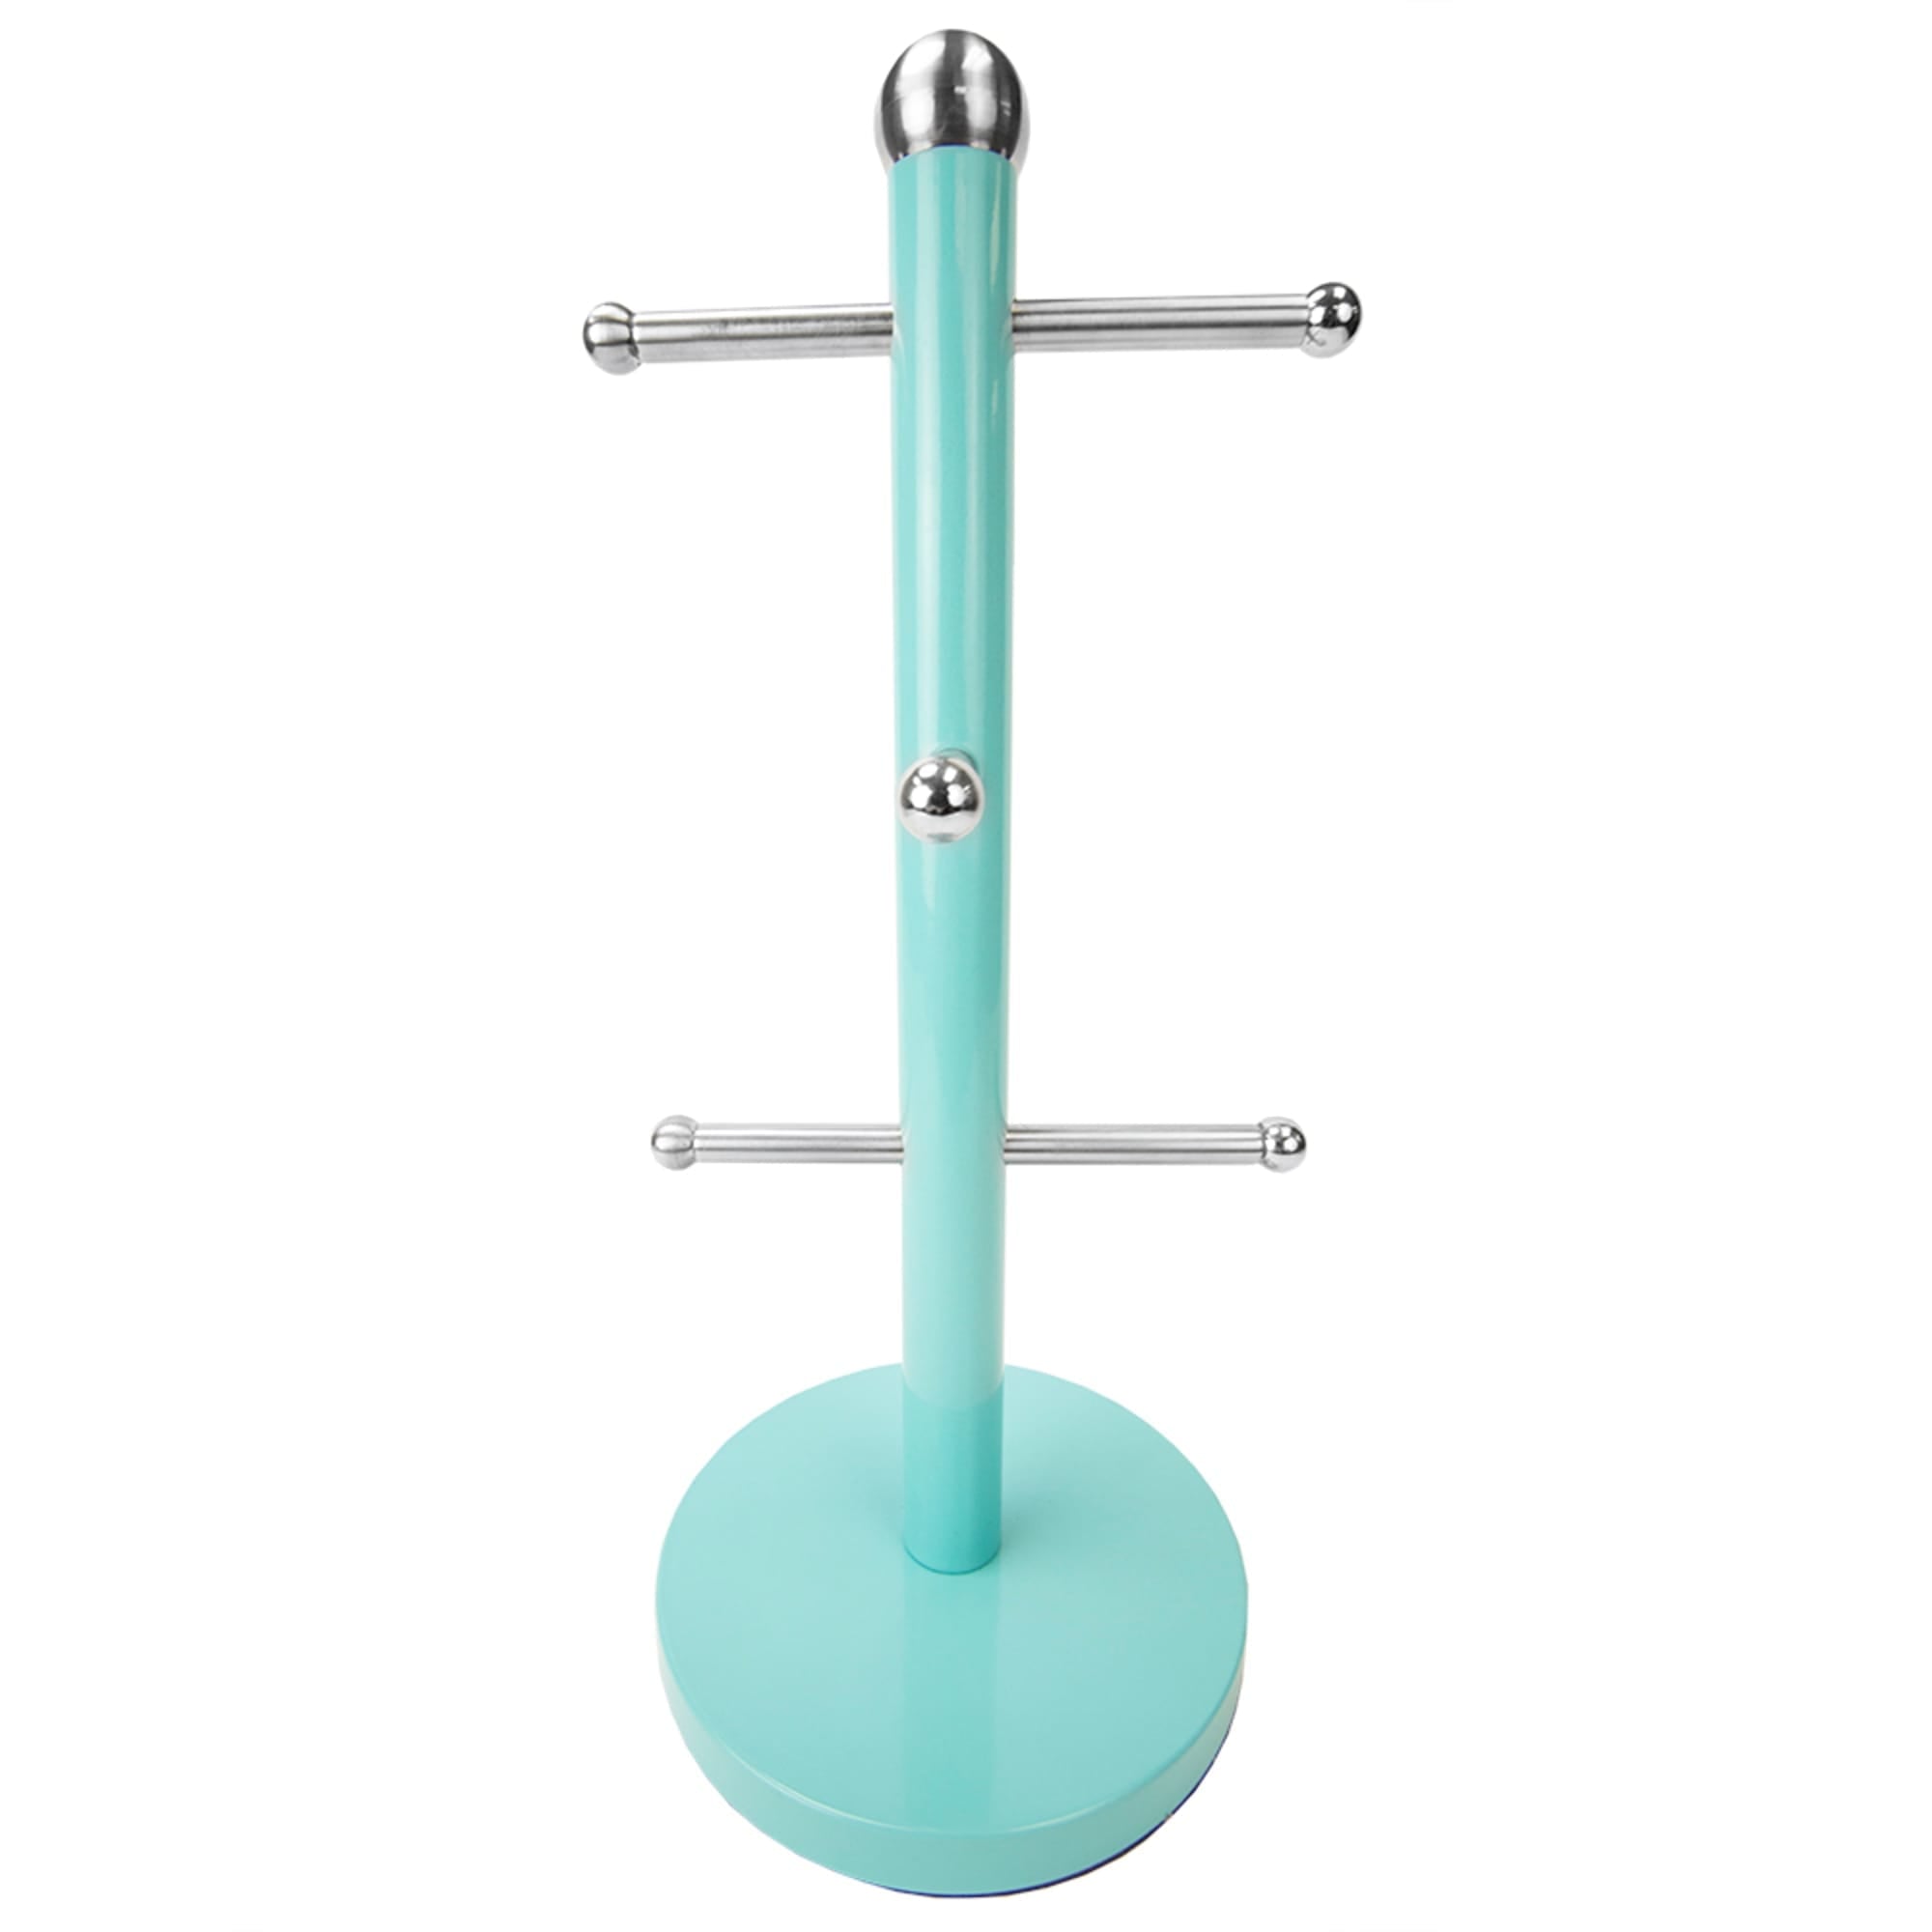 Home Basics Turquoise Collection  6 Cup Steel Mug Tree Holder Stand with Rounded Silver Ends $6.50 EACH, CASE PACK OF 6